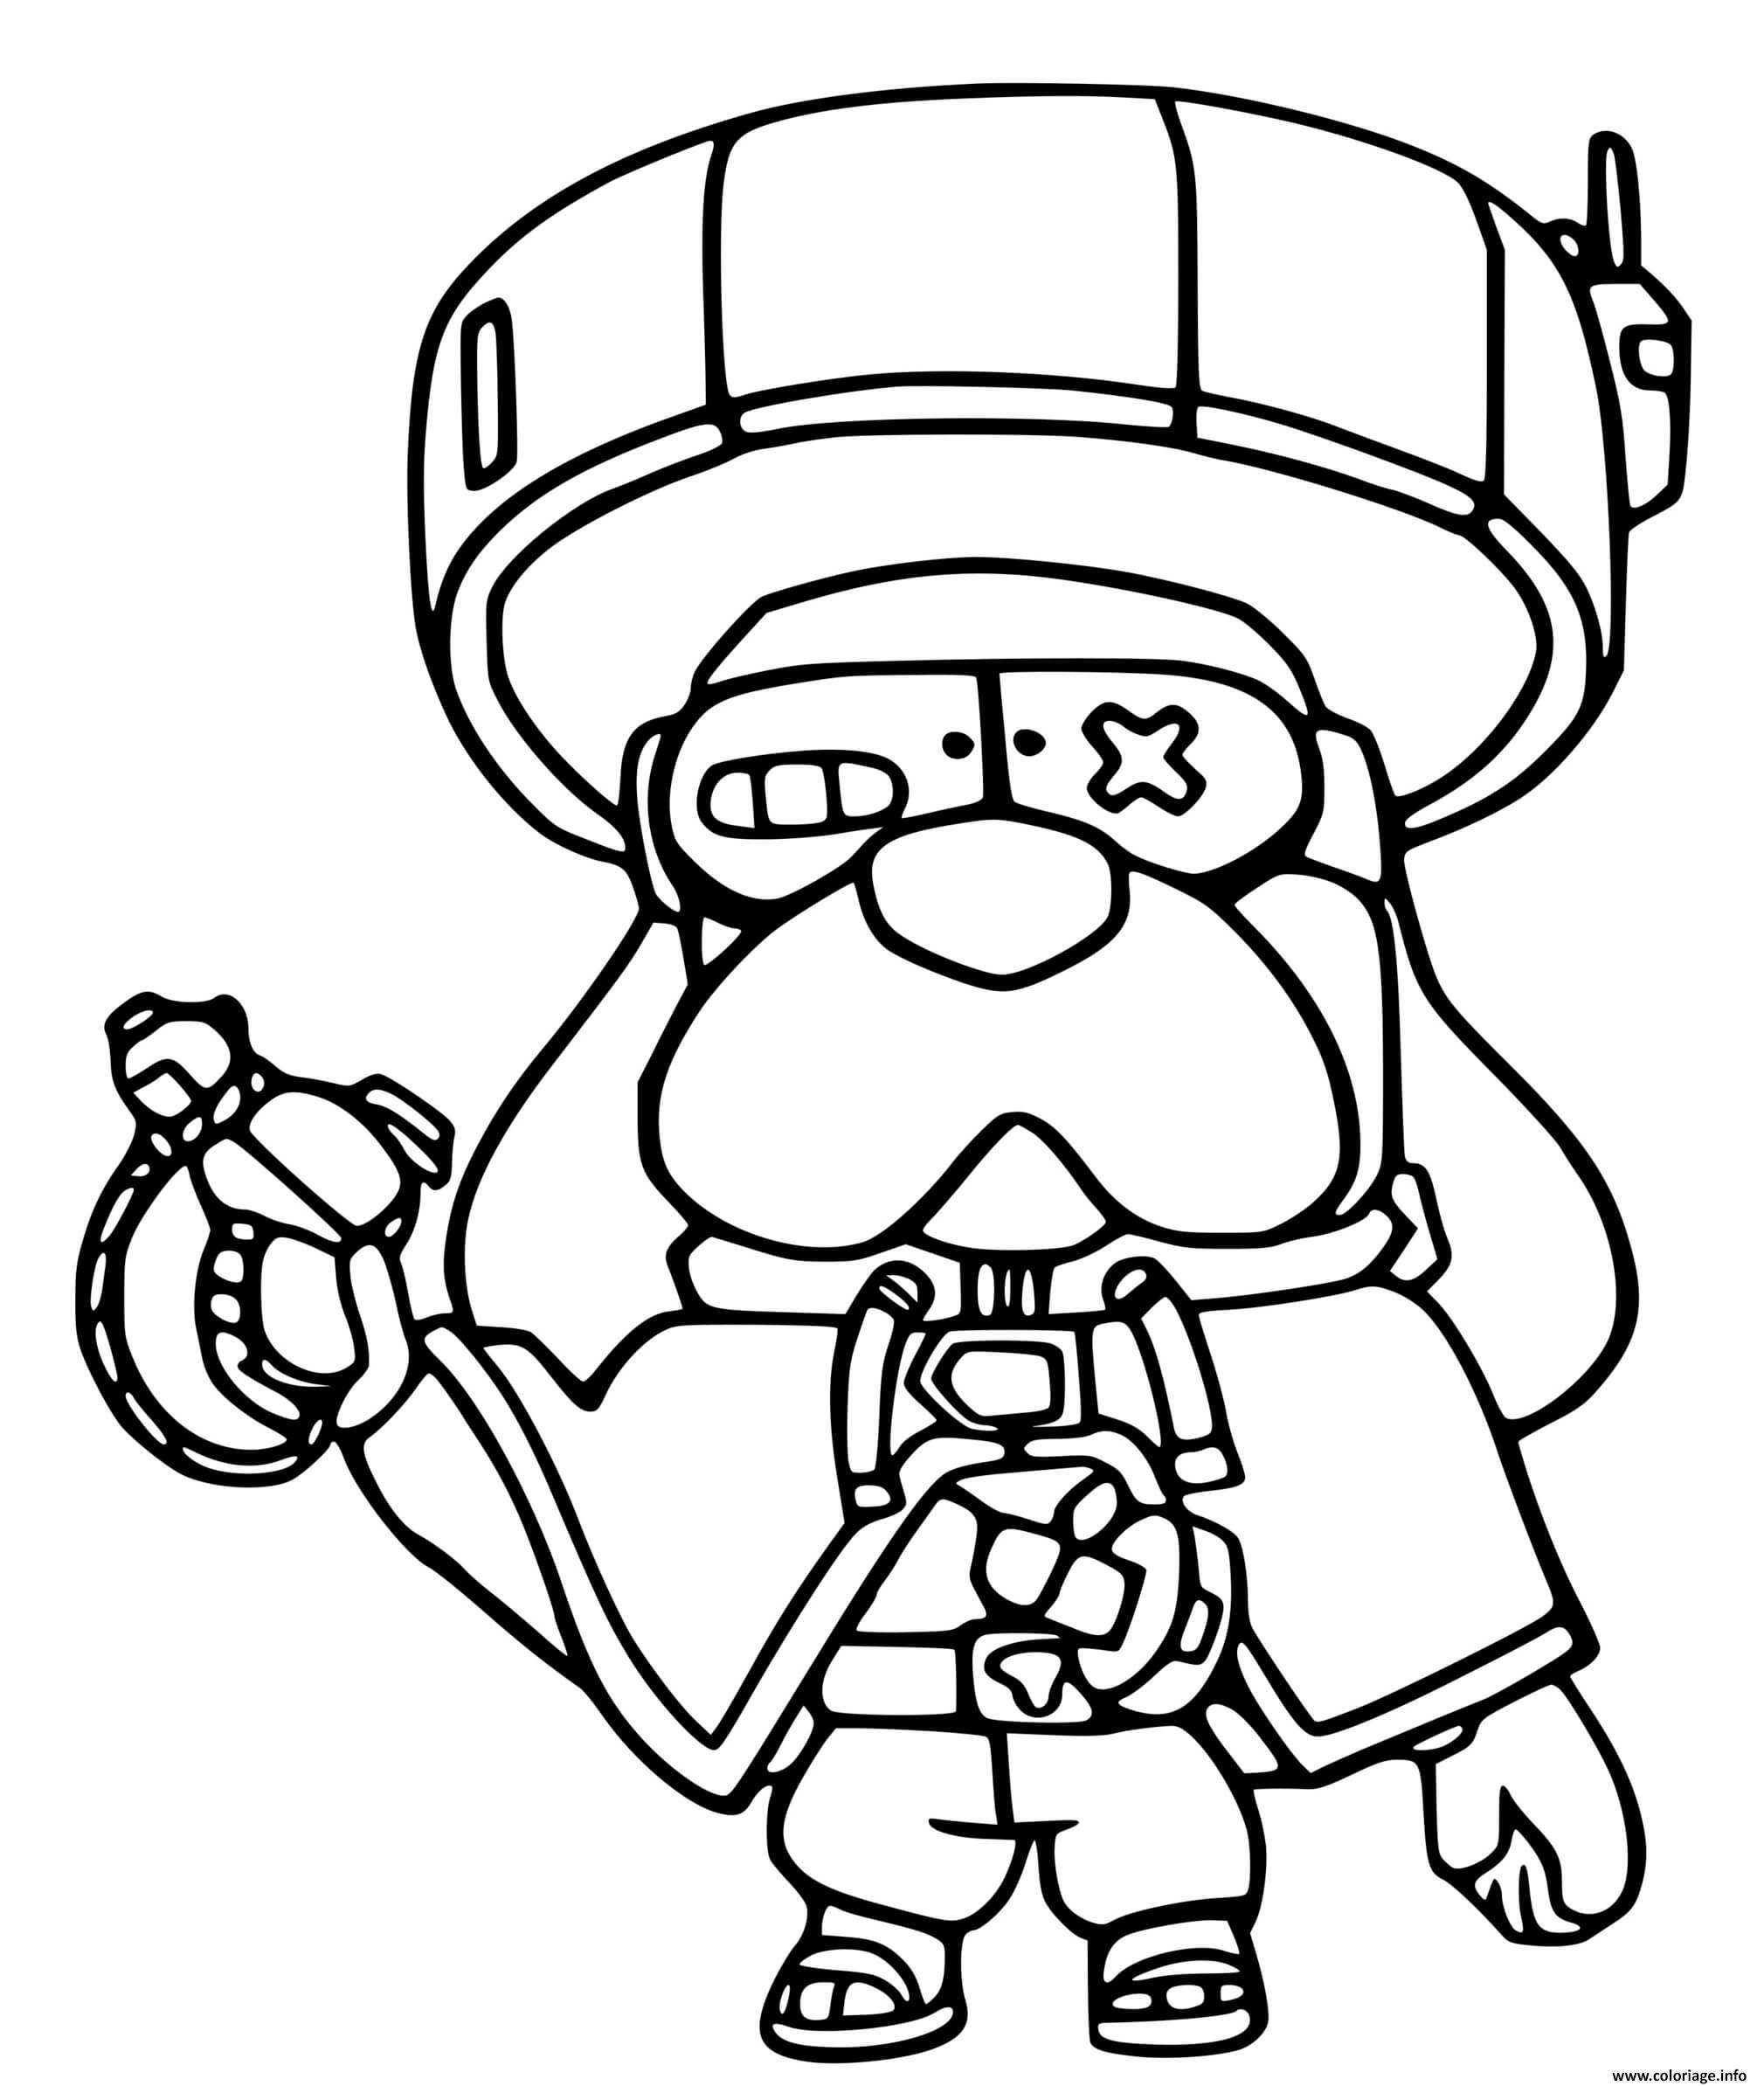 Coloriage Brawl Stars Force Starr Medor Ronin Dessin Brawl Stars A Imprimer - coloriage de brawl stars avec a colorier